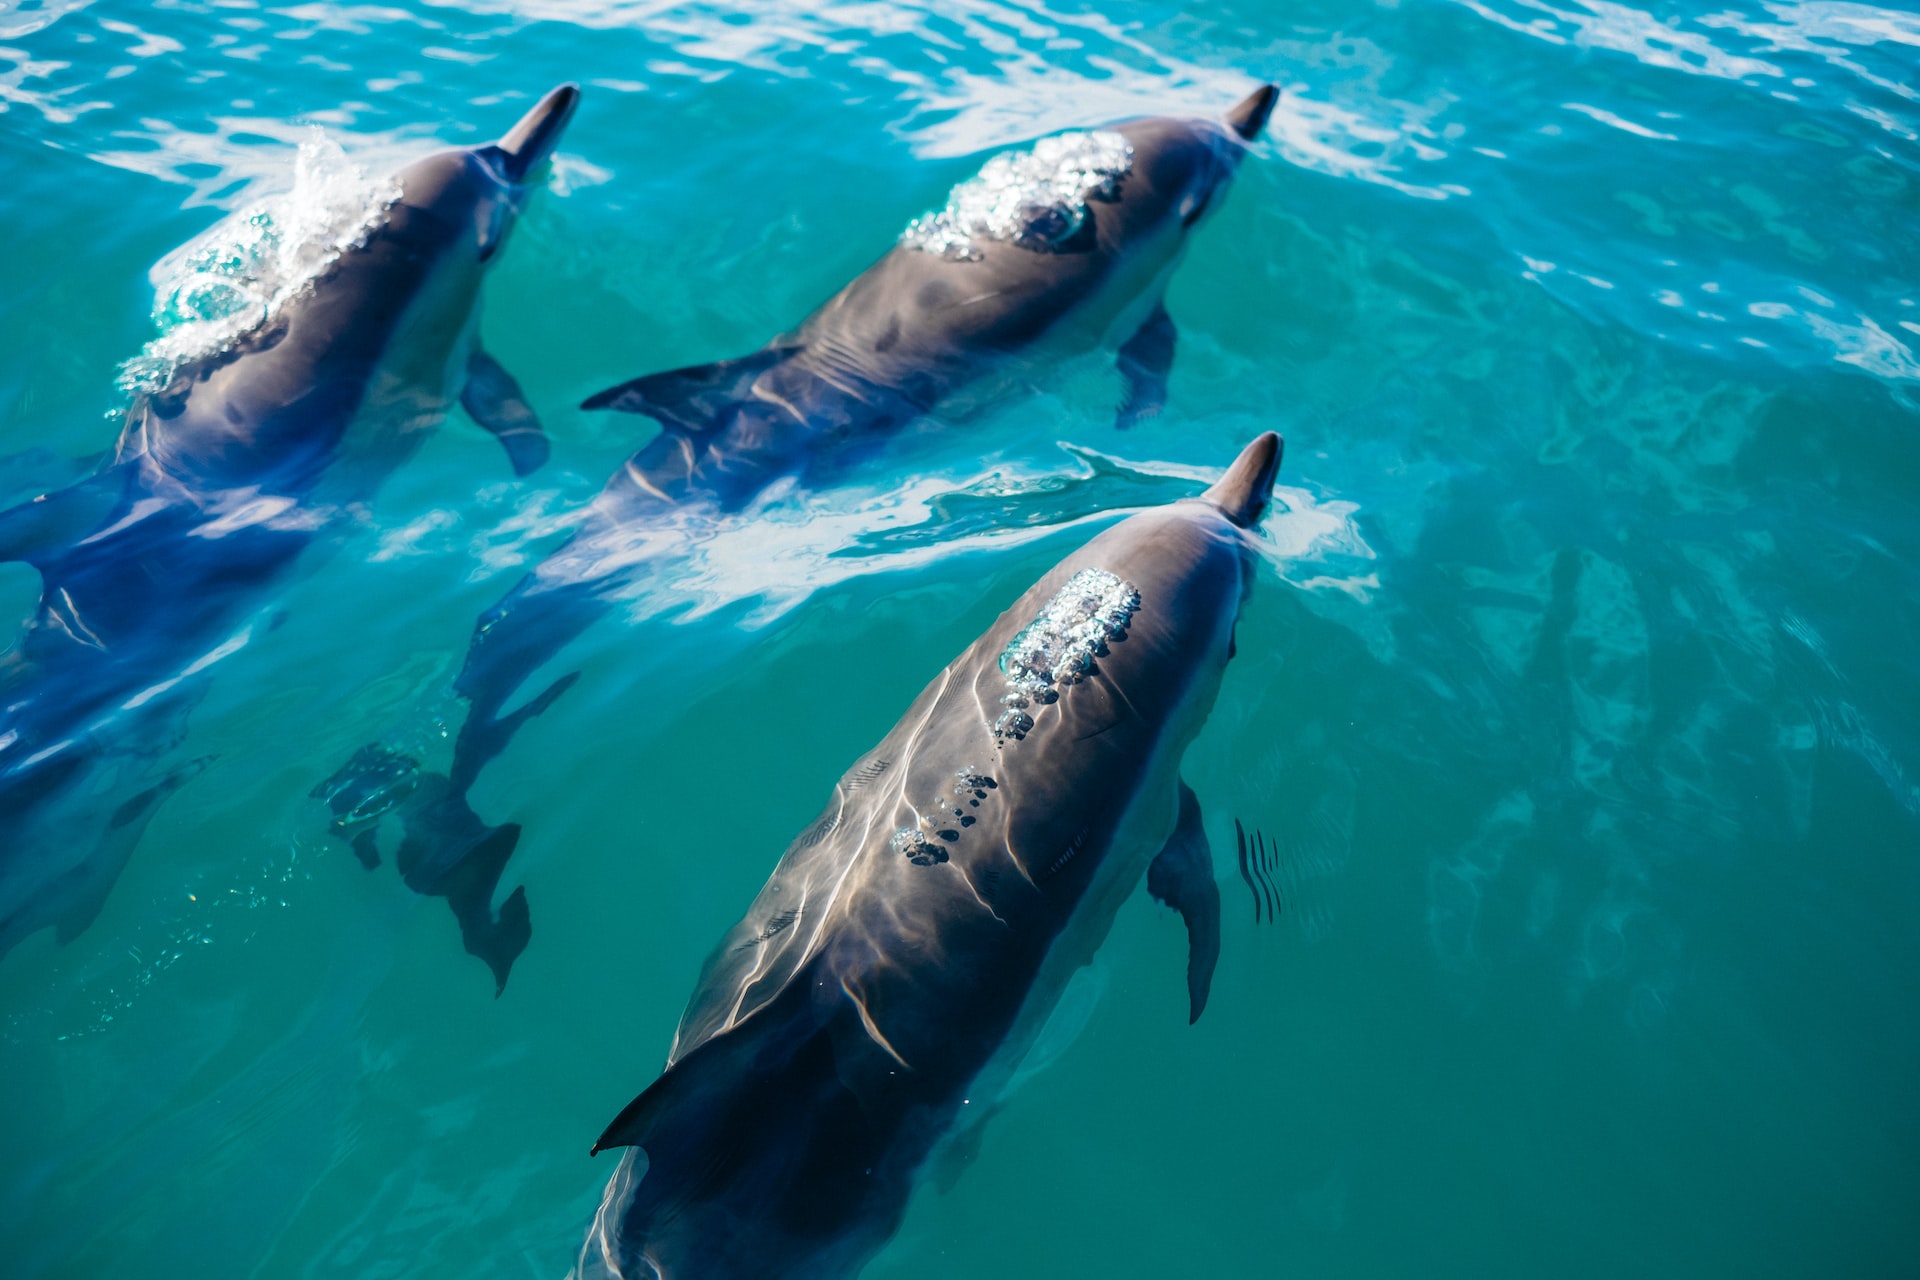 A pod of dolphins blowing bubbles out of their blowholes.